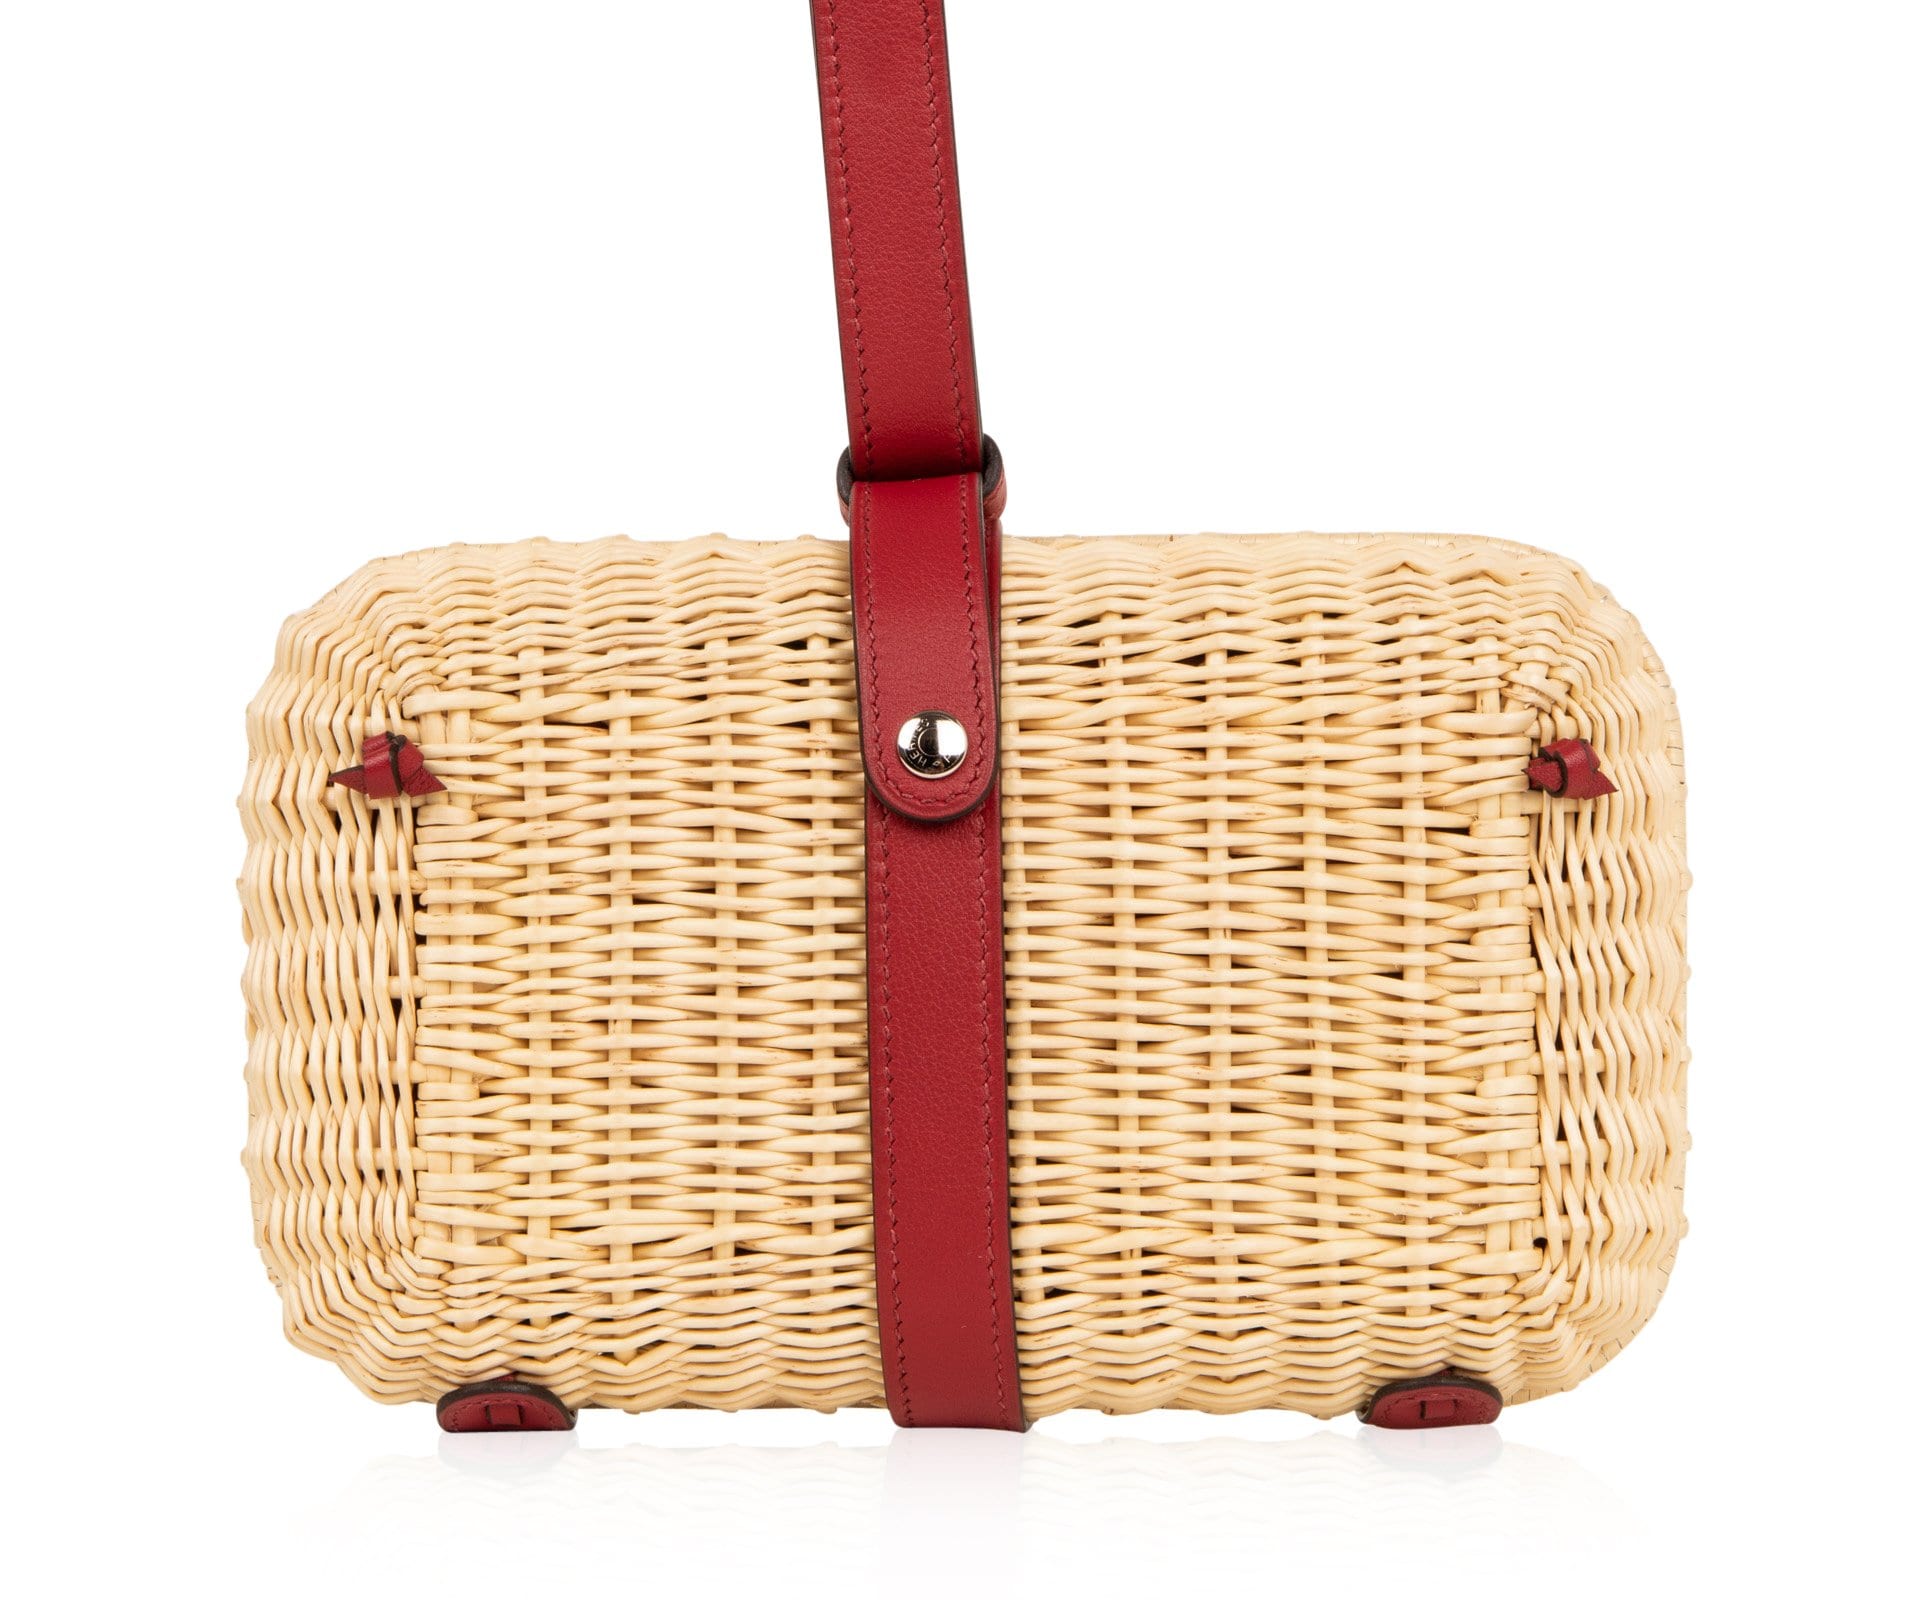 A LIMITED EDITION ROUGE SELLIER SWIFT LEATHER & OSIER PICNIC